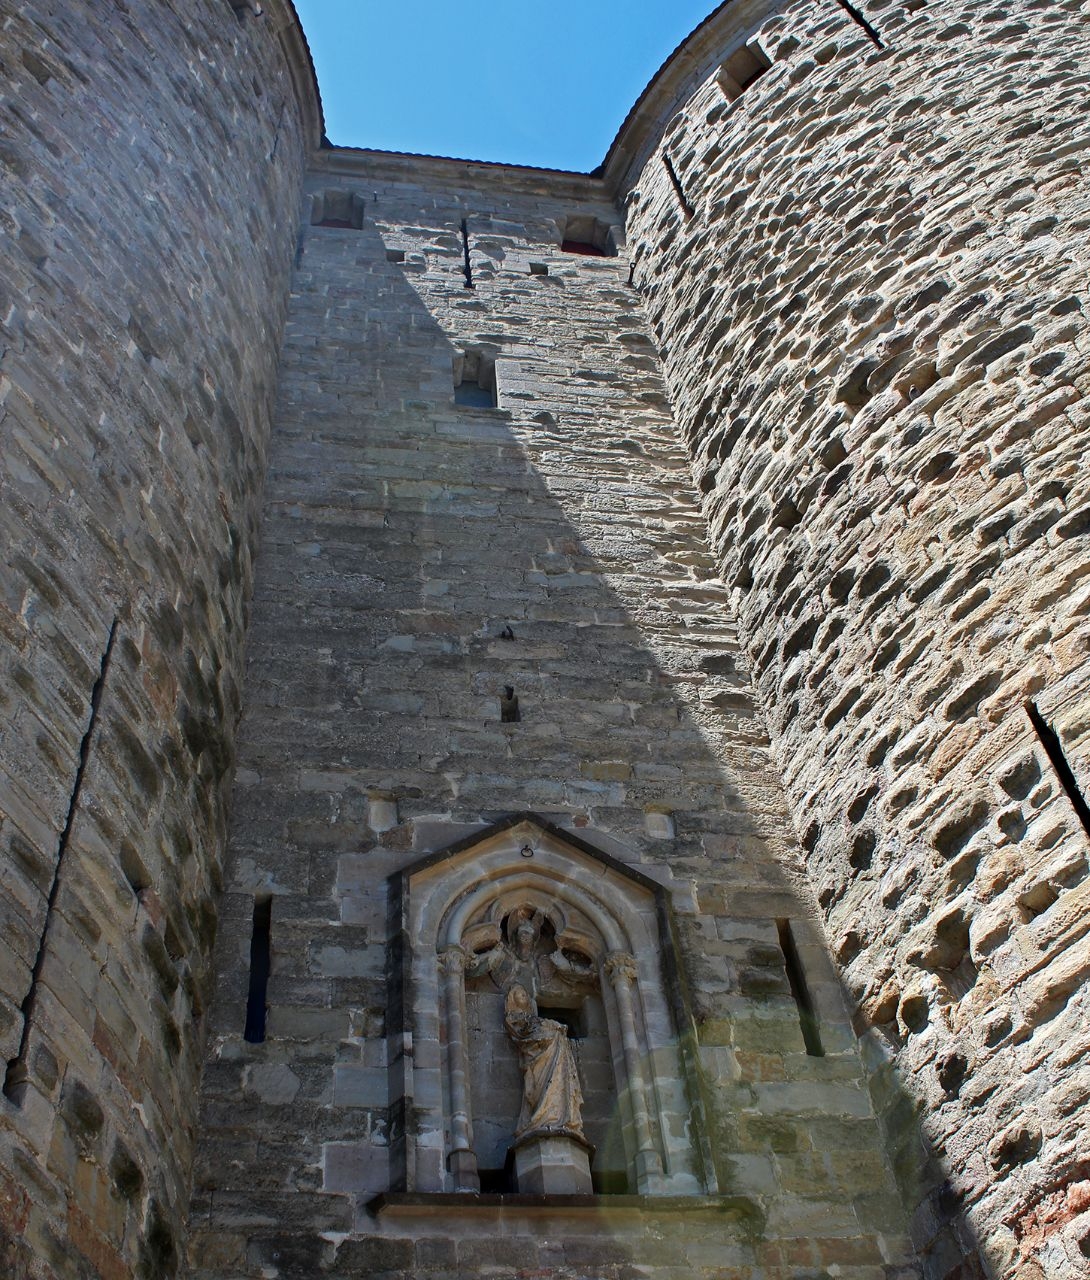 Historic Fortified City of Carcassonne (UNESCO # 345)